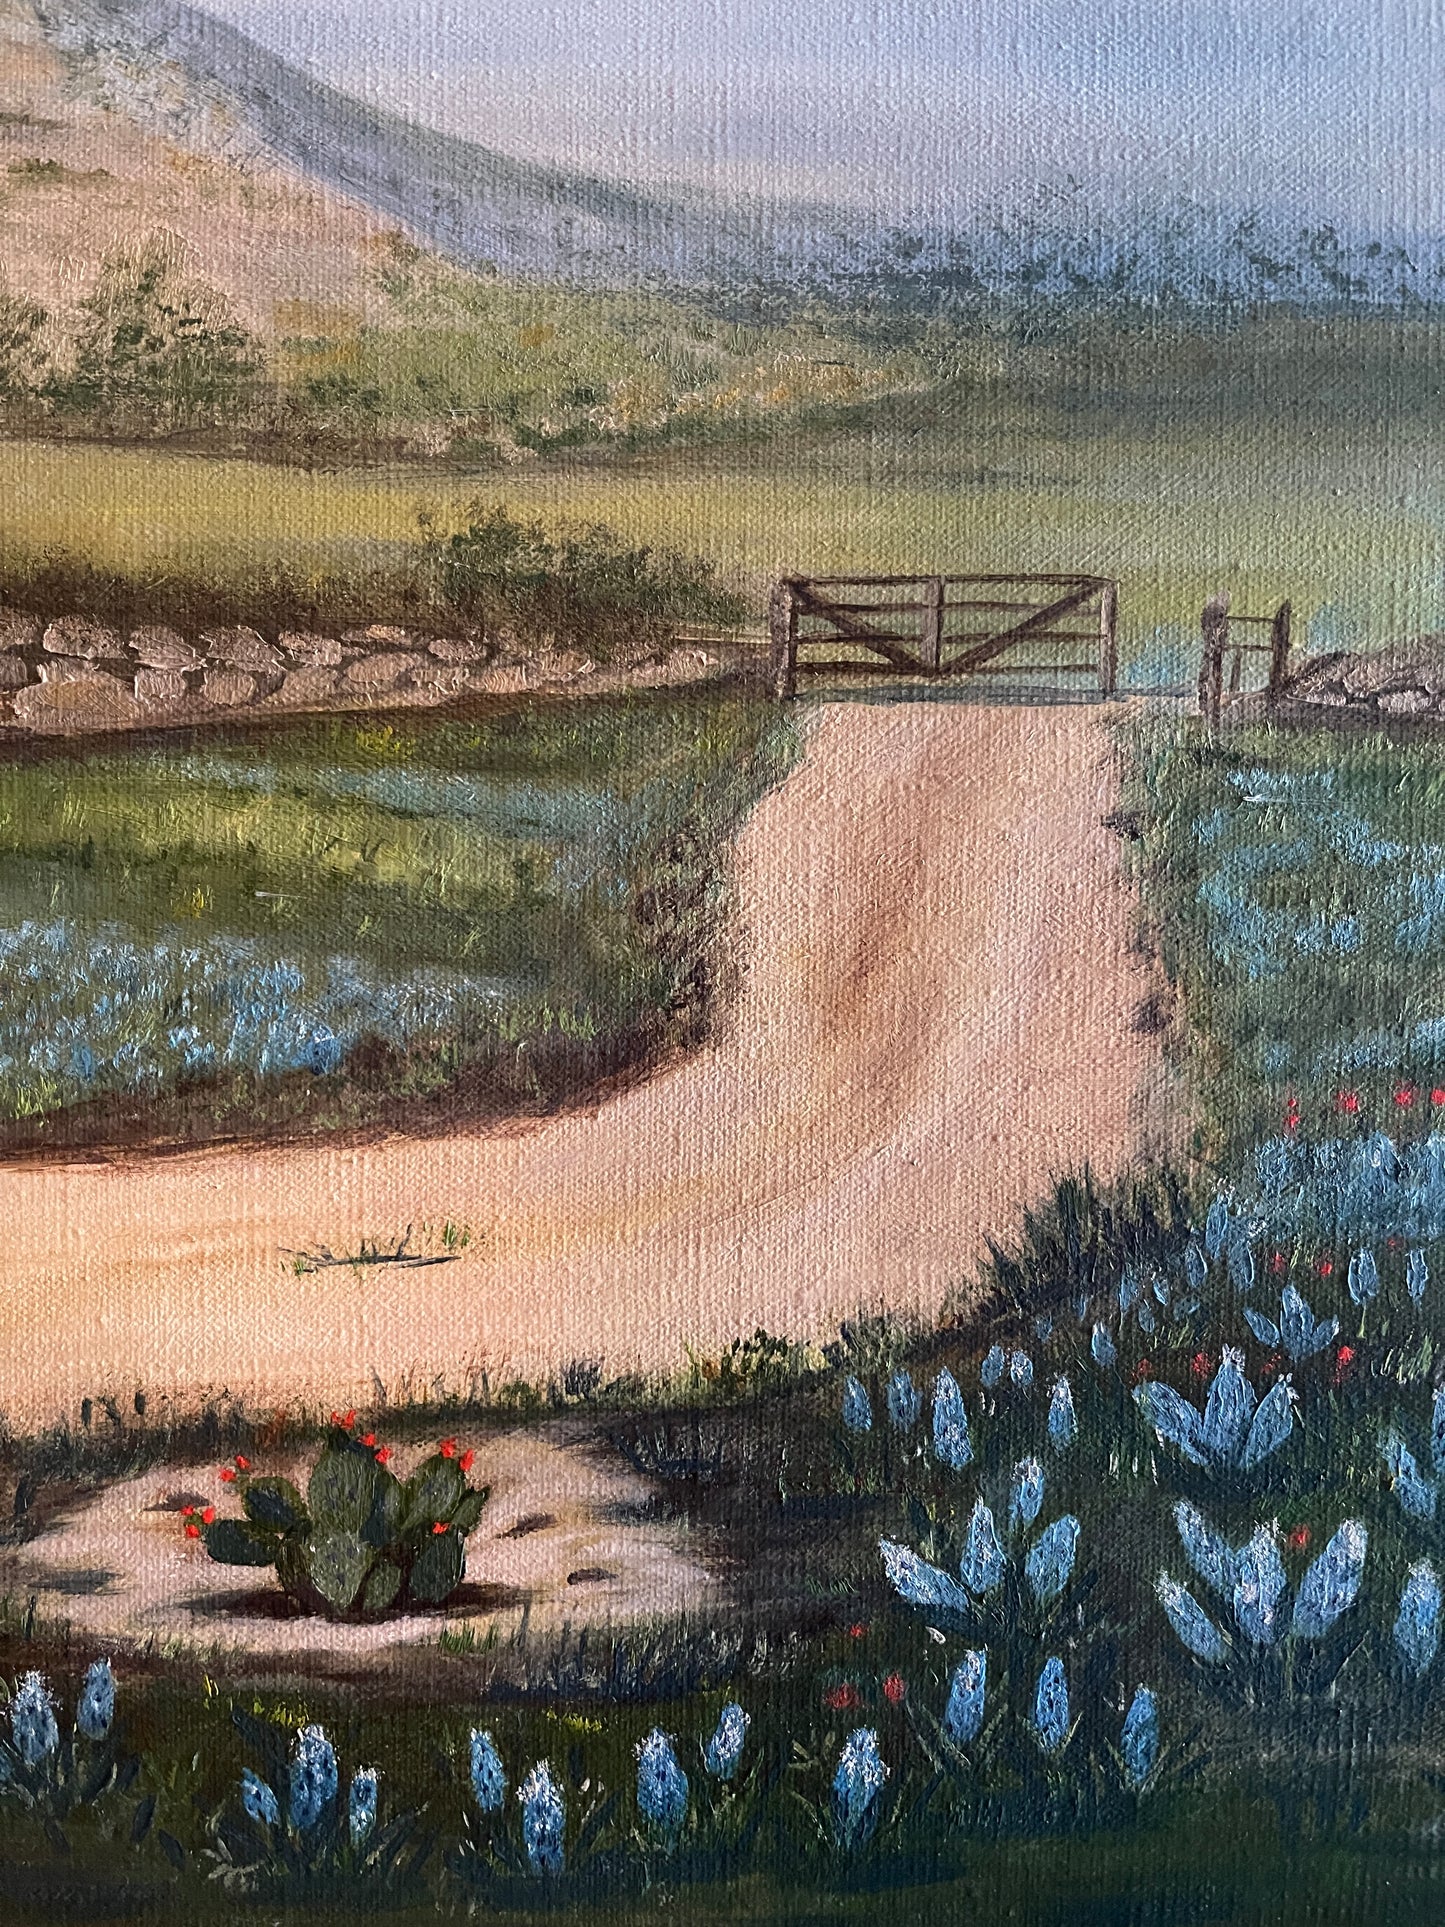 Texas Hill Country Bluebonnet Painting, Large Oil on Canvas, Artist Signed